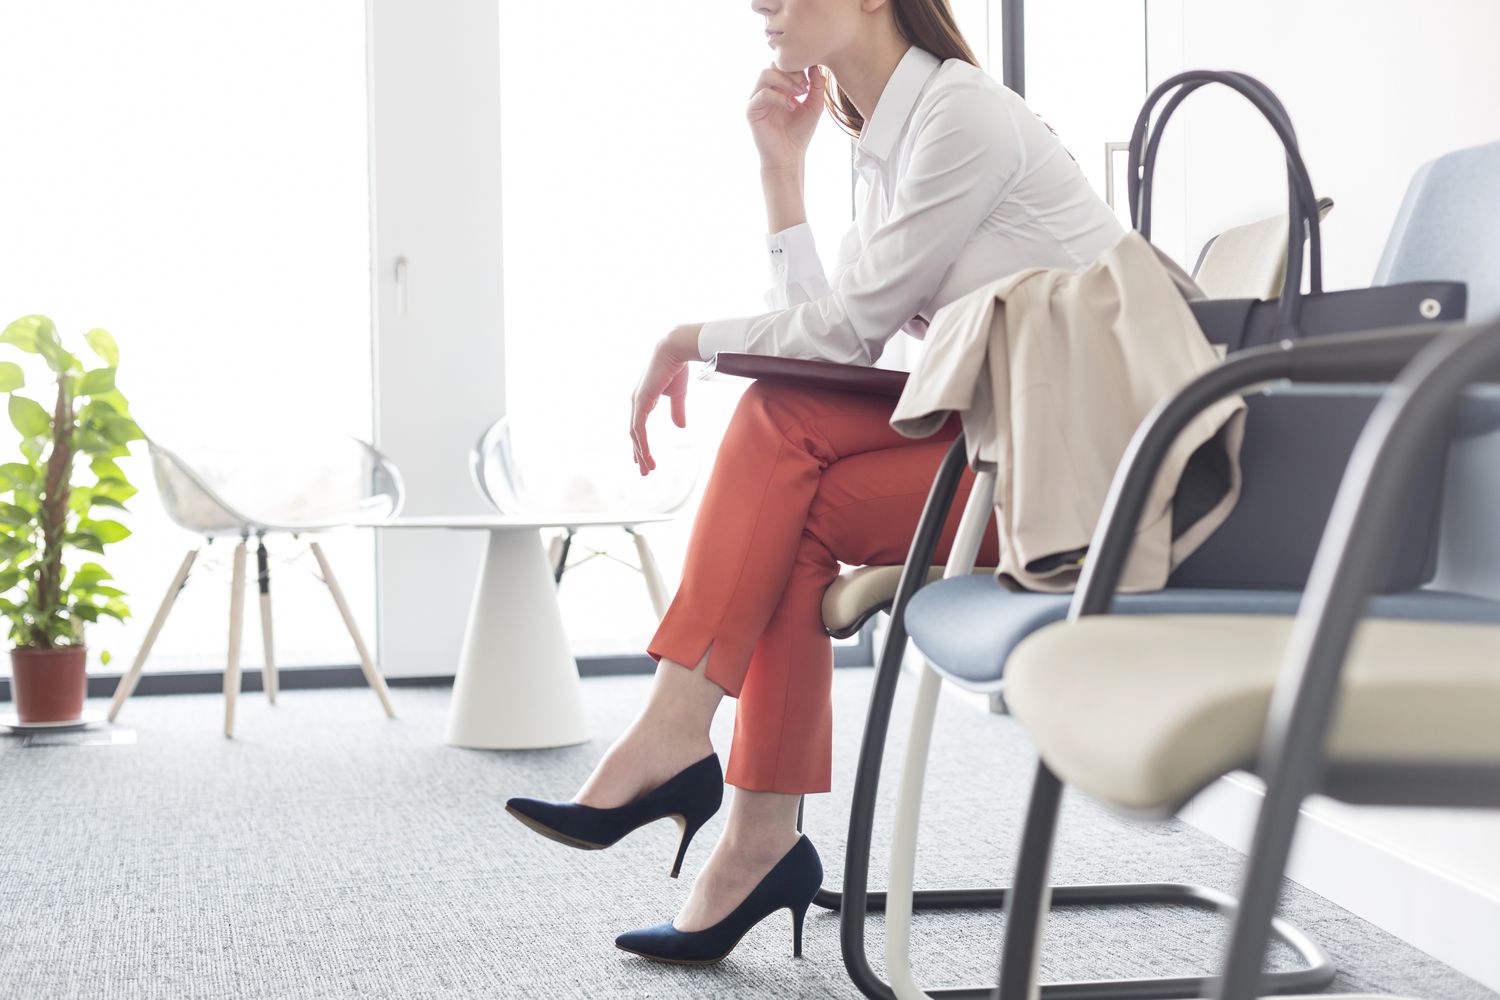 Businesswoman waiting with legs crossed in lobby